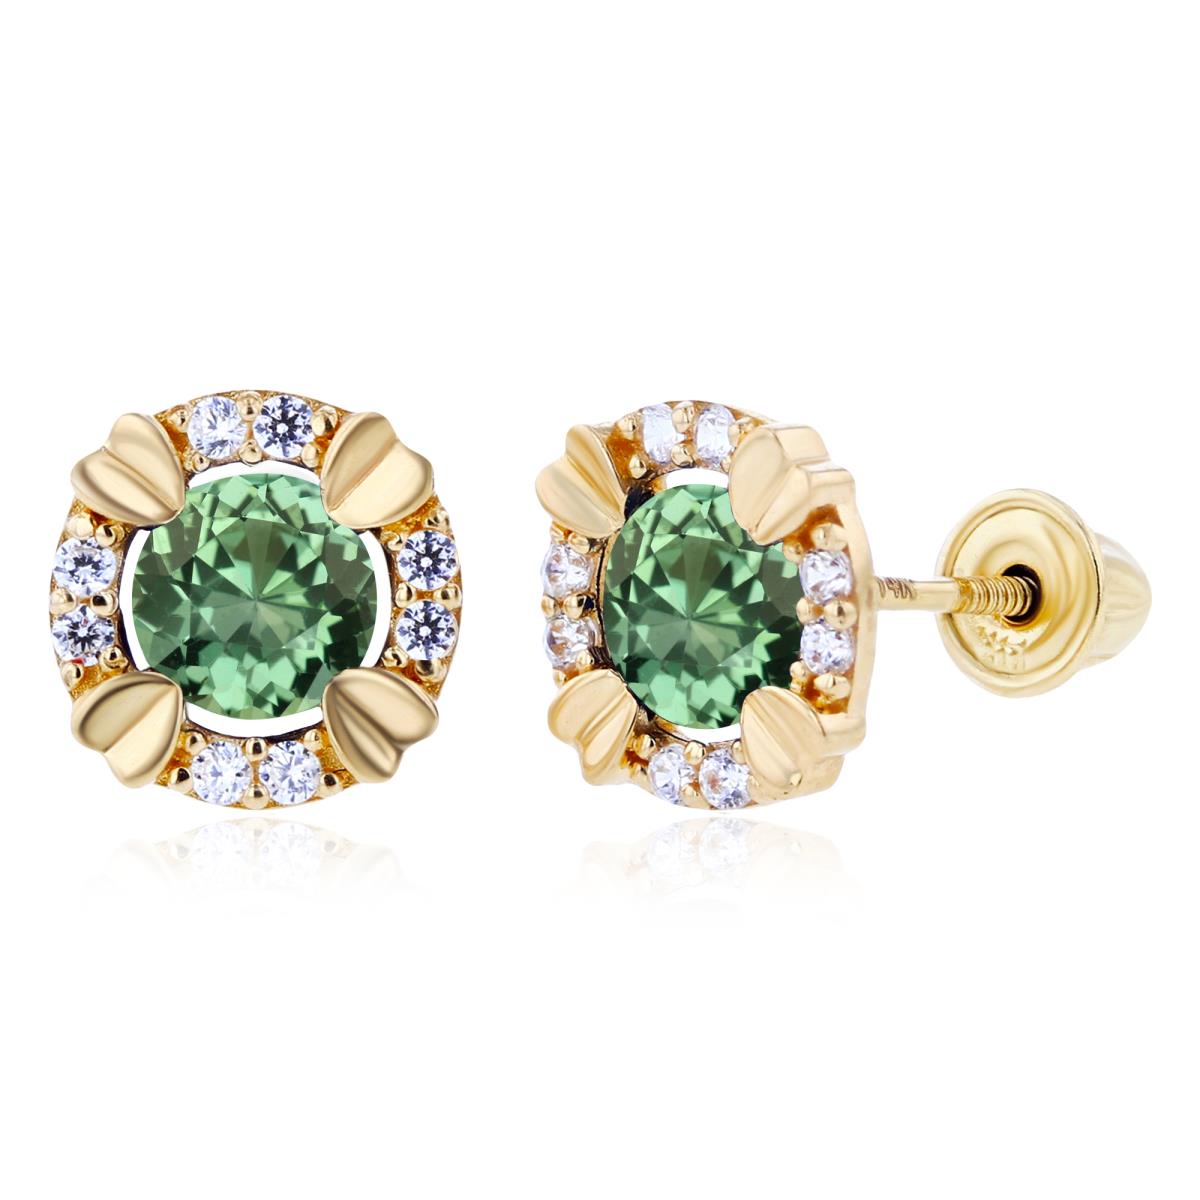 14K Yellow Gold 4mm Round Created Green Sapphire & 1mm Created White Sapphire Halo Screwback Earrings